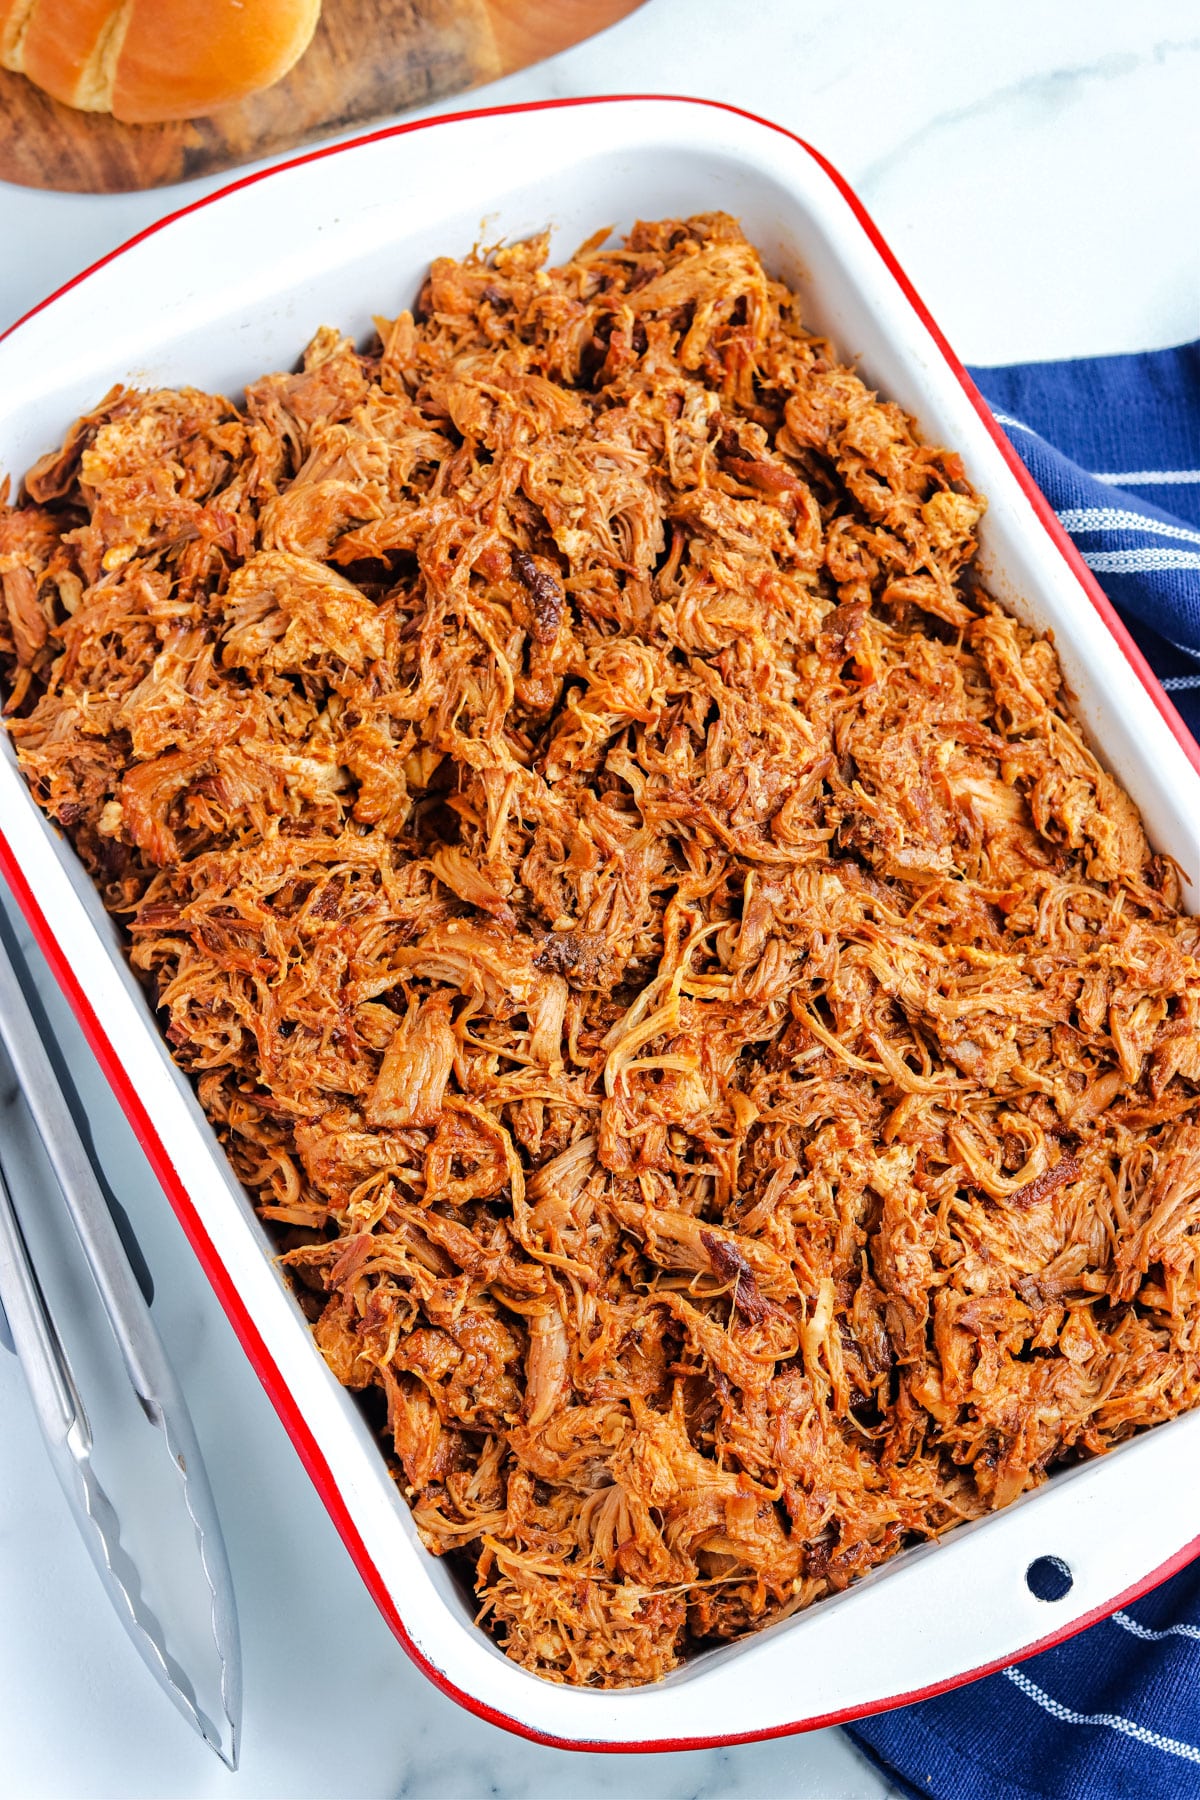 A 9x13 baking dish with the finished pulled pork in it.